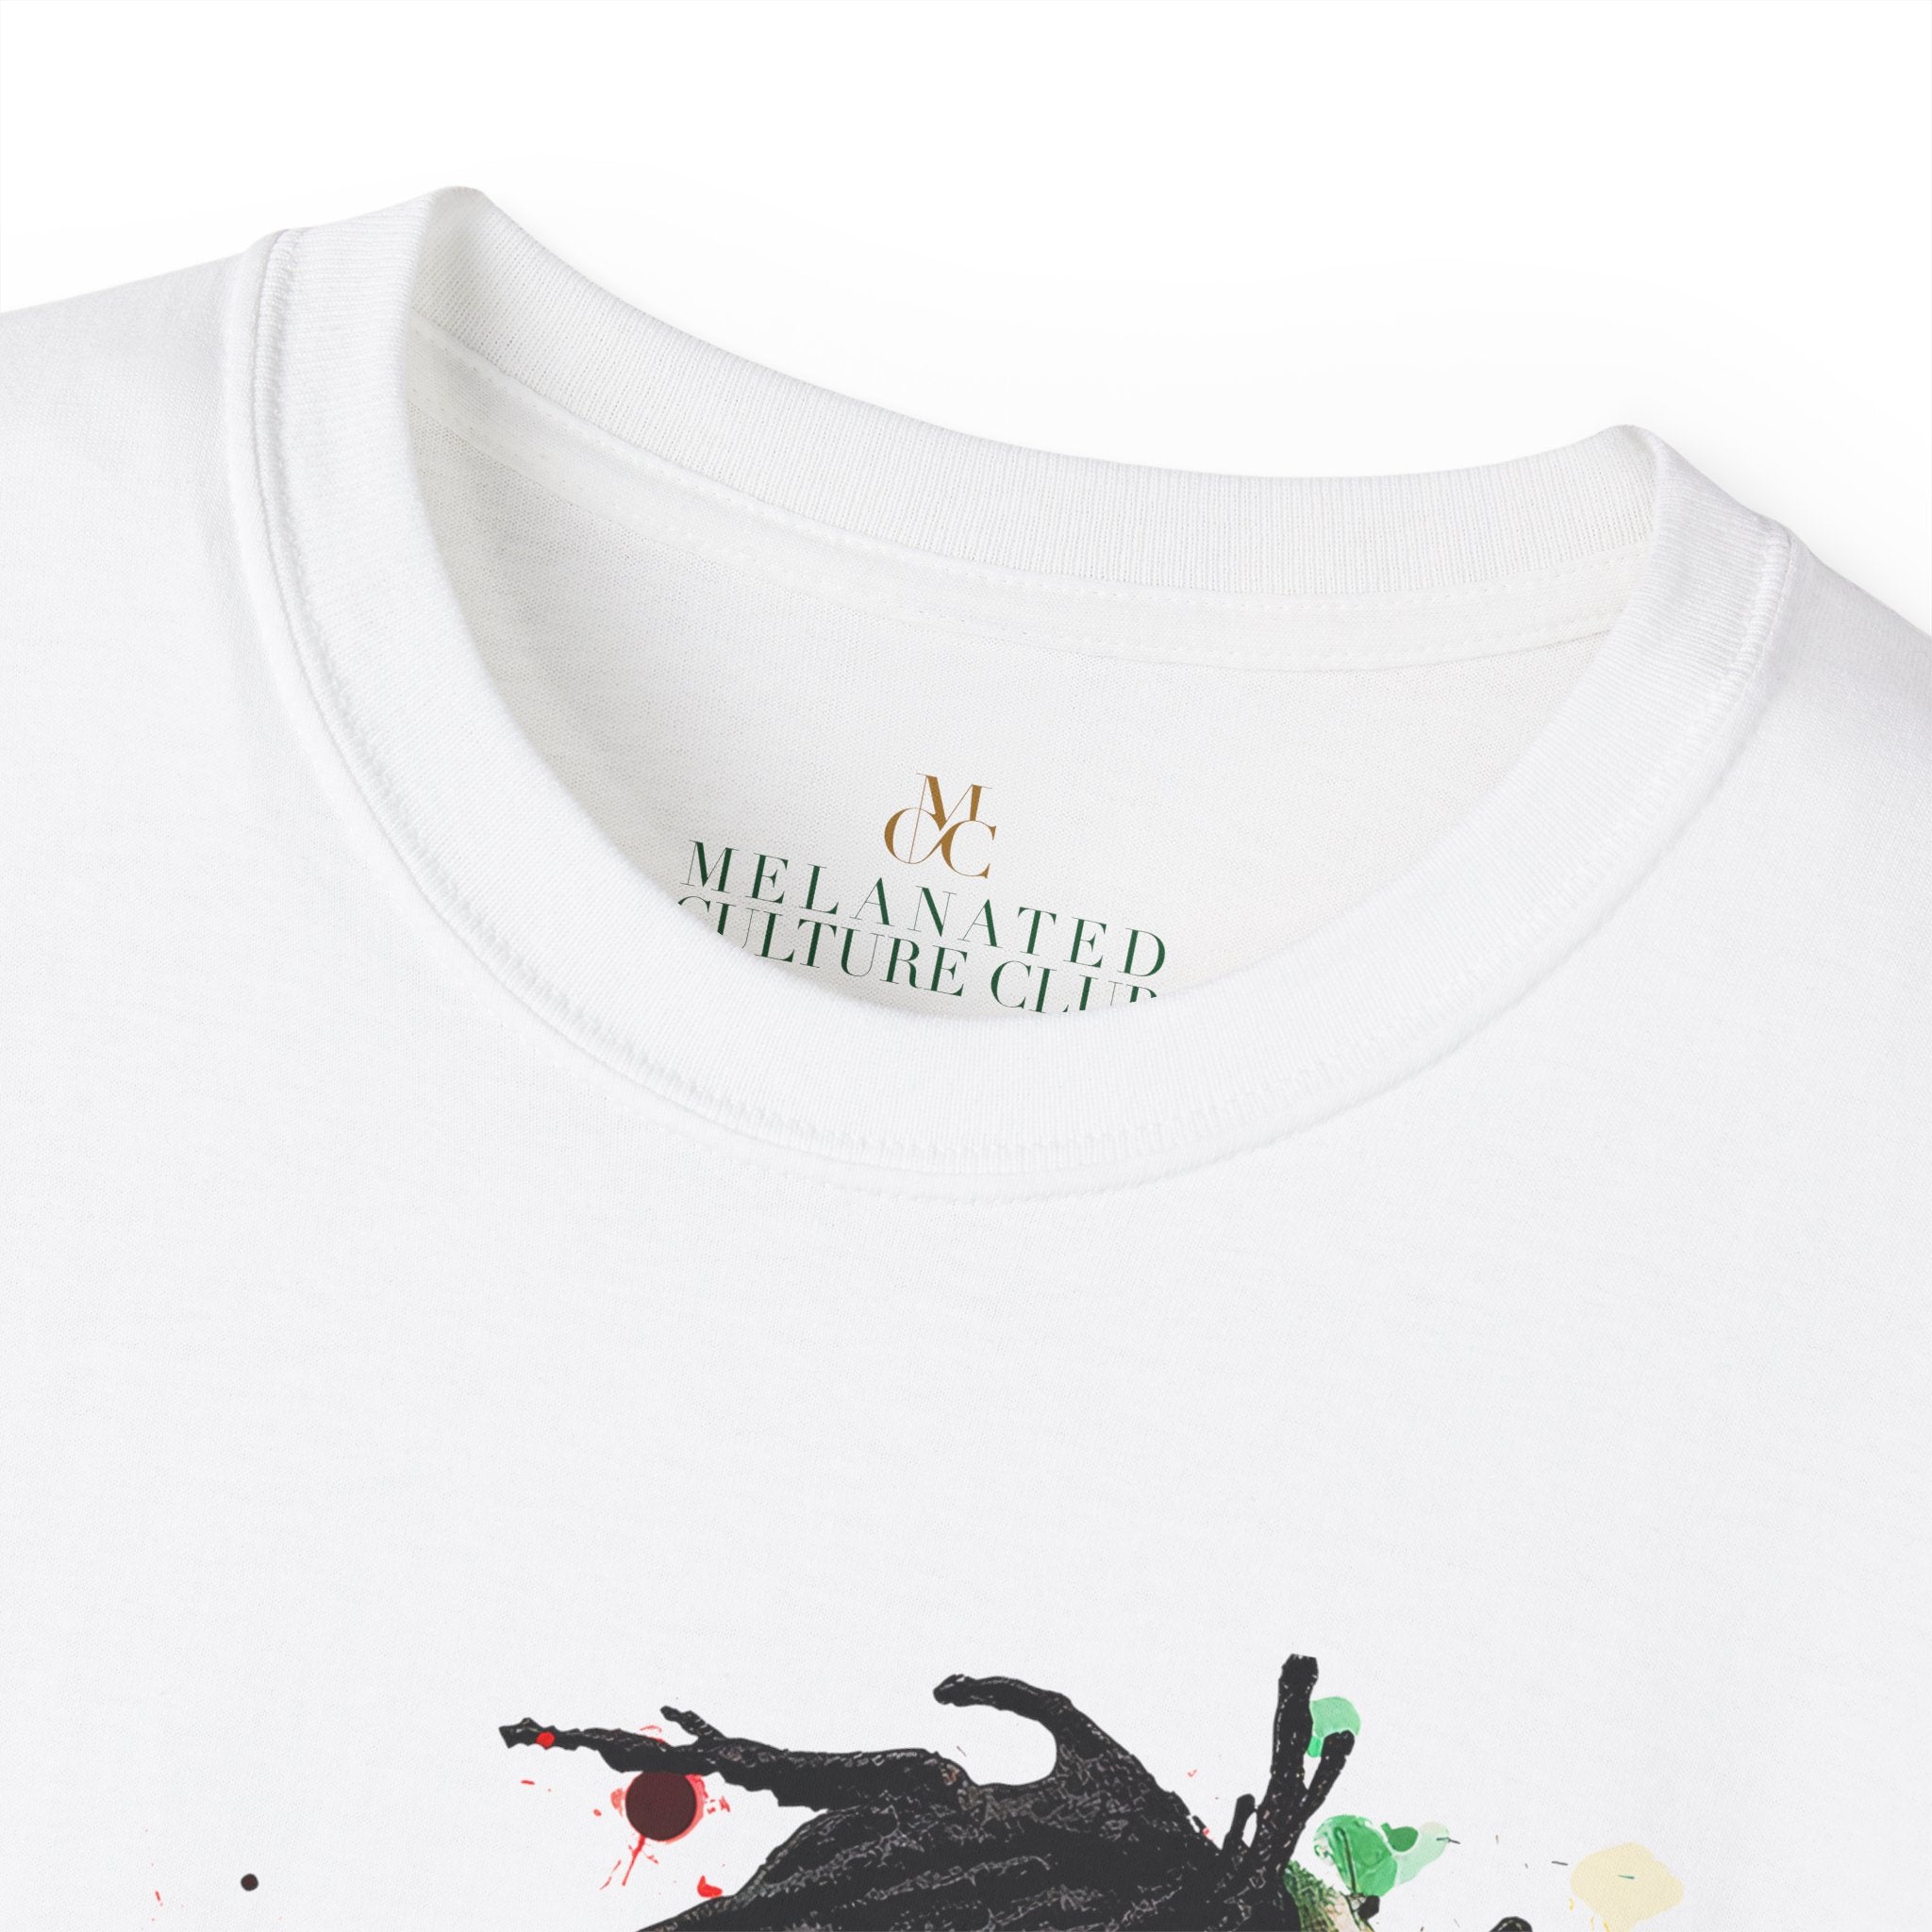 Abstract art tee shirt shown in white, inside logo label tag.